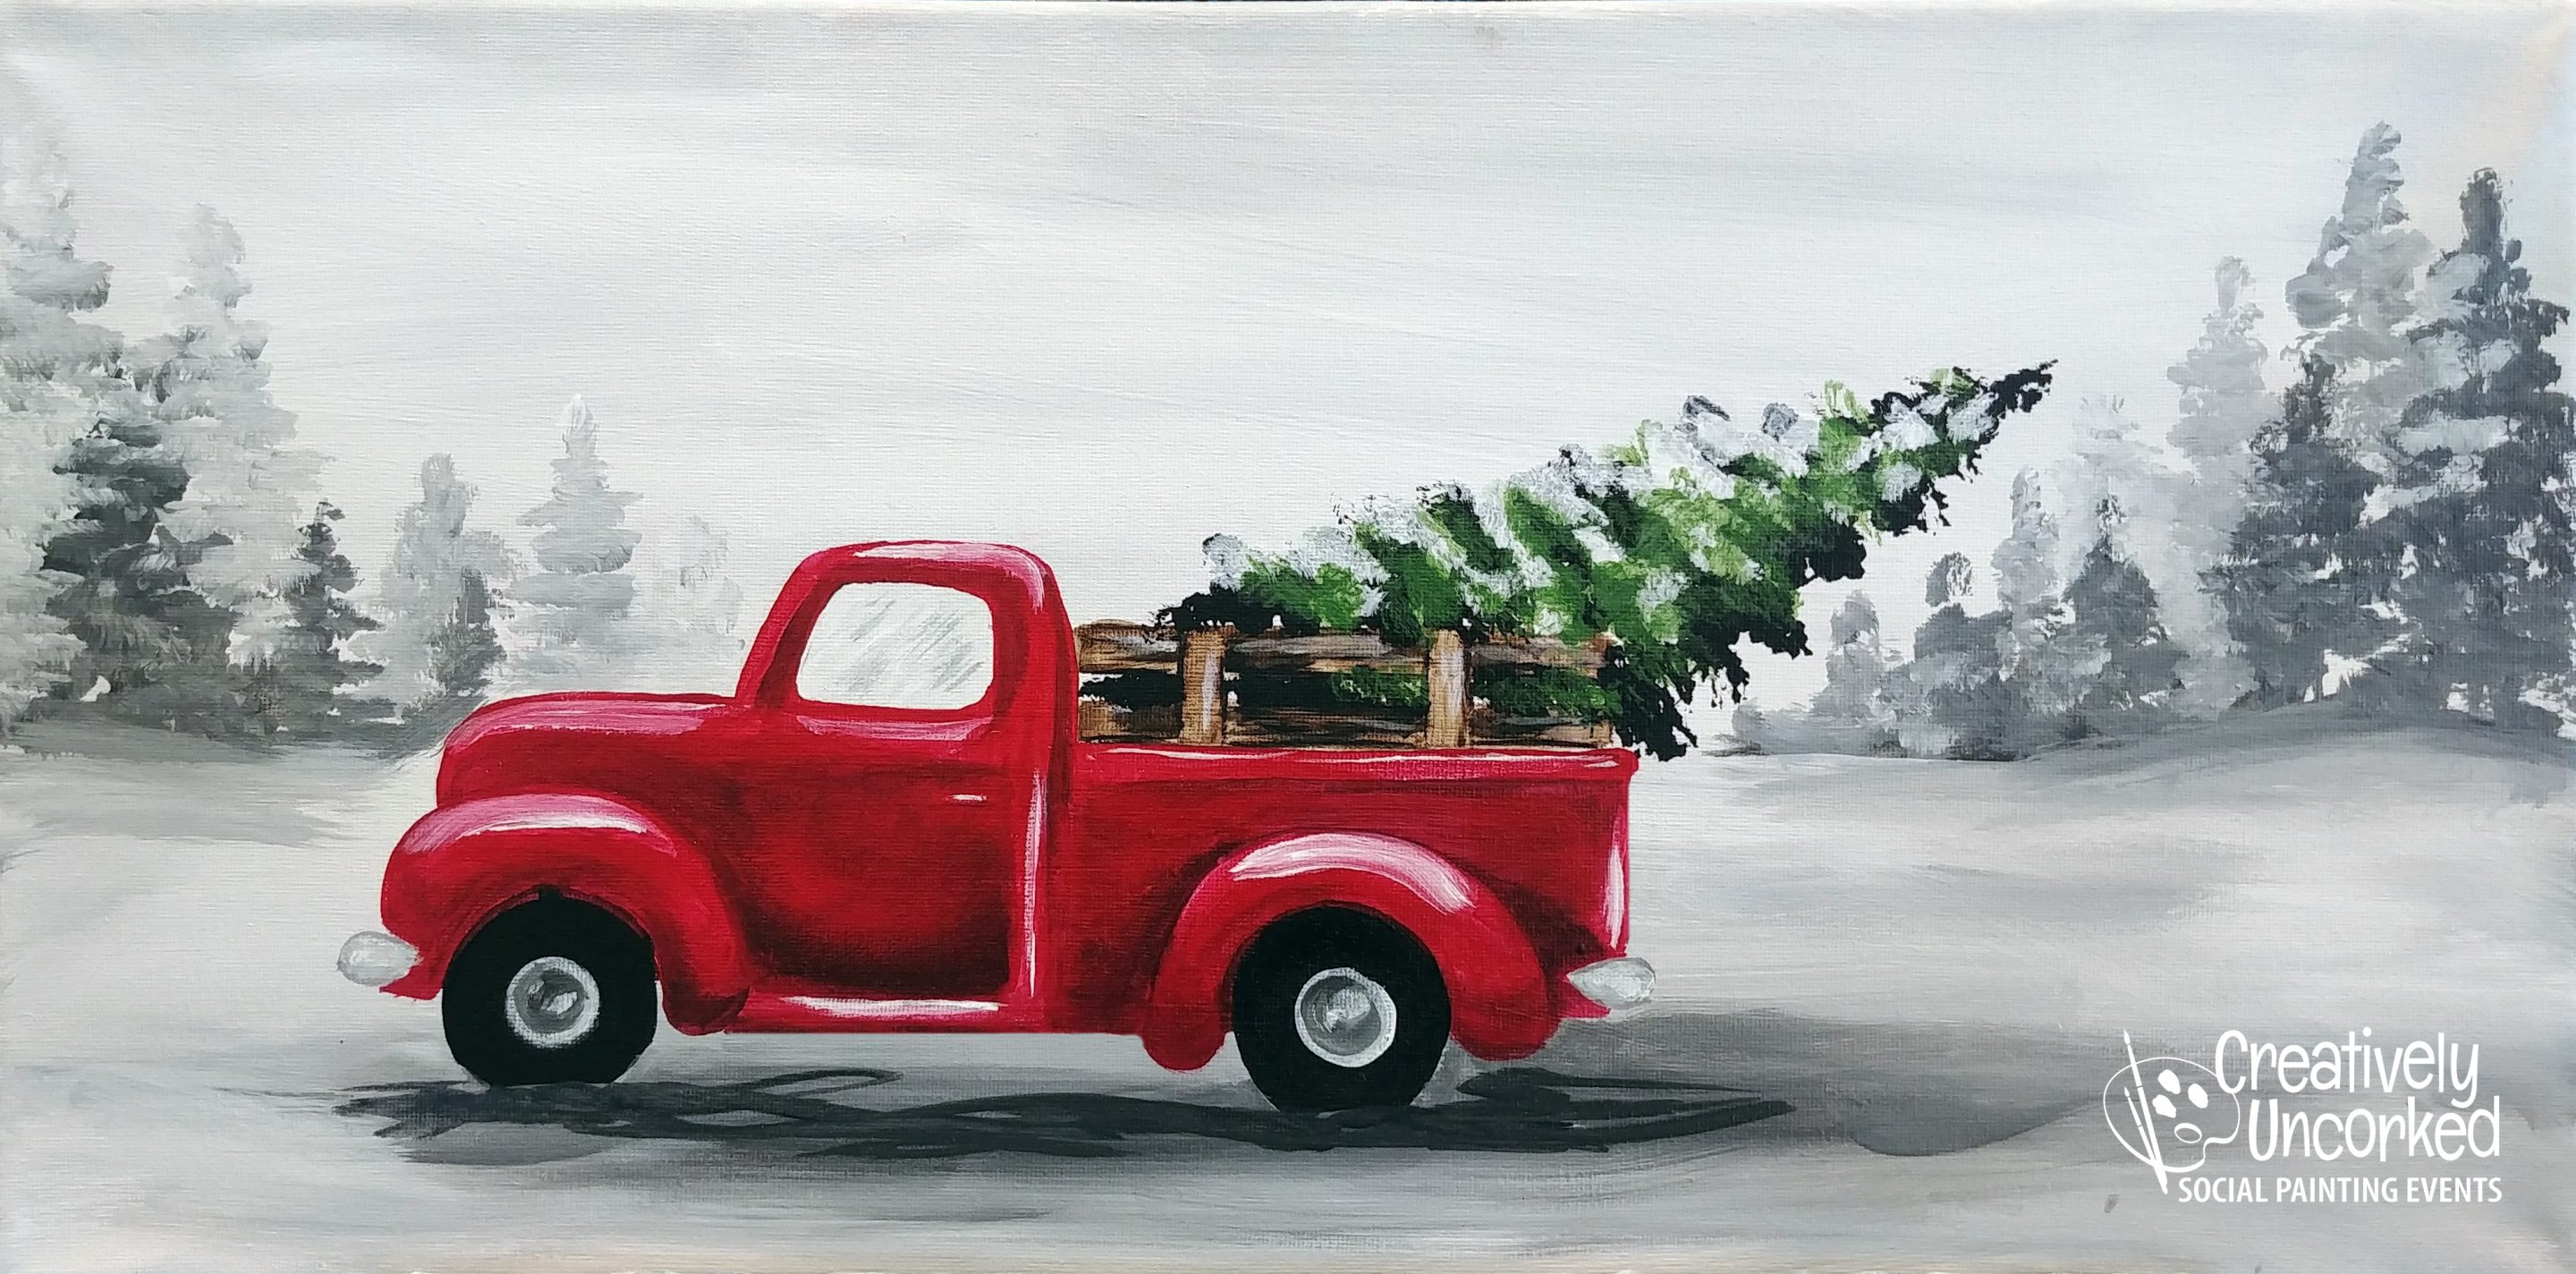 Bringing Home the Christmas Tree in a Red Truck at Creatively Uncorked https://creativelyuncorked.com/